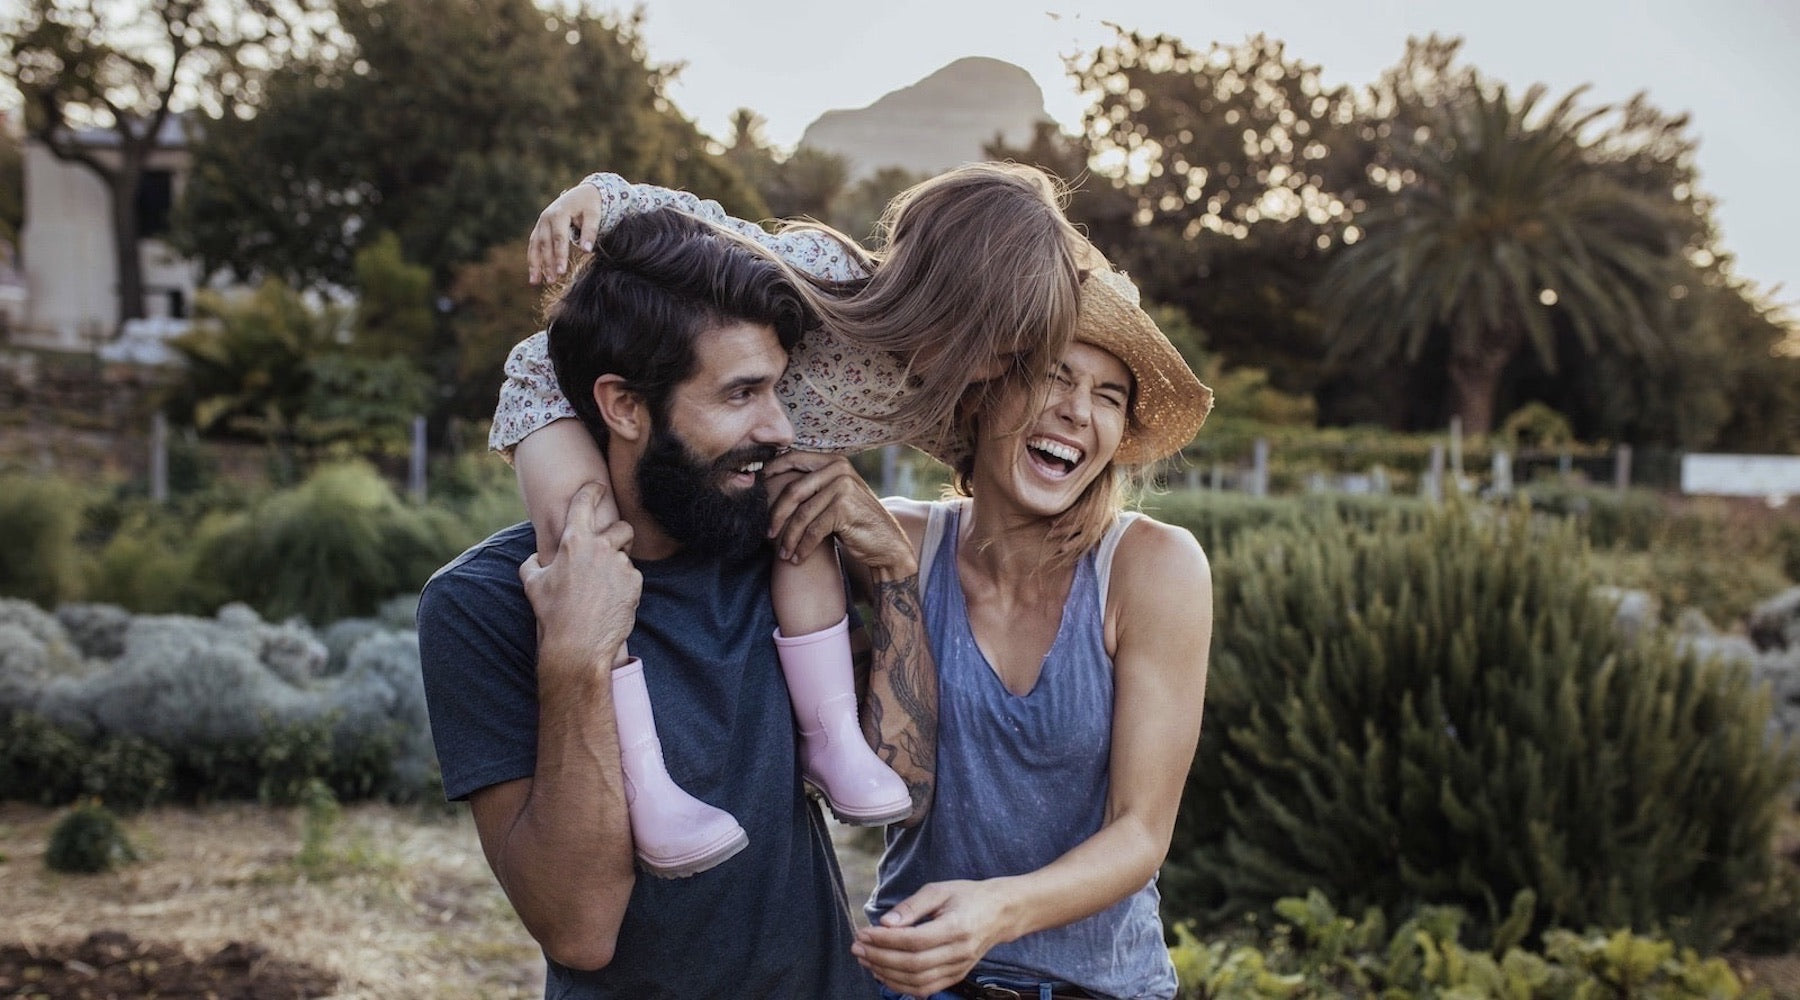 Bearded man with a young girl on his shoulders and a laughing women beside him enjoying a walk in the countryside